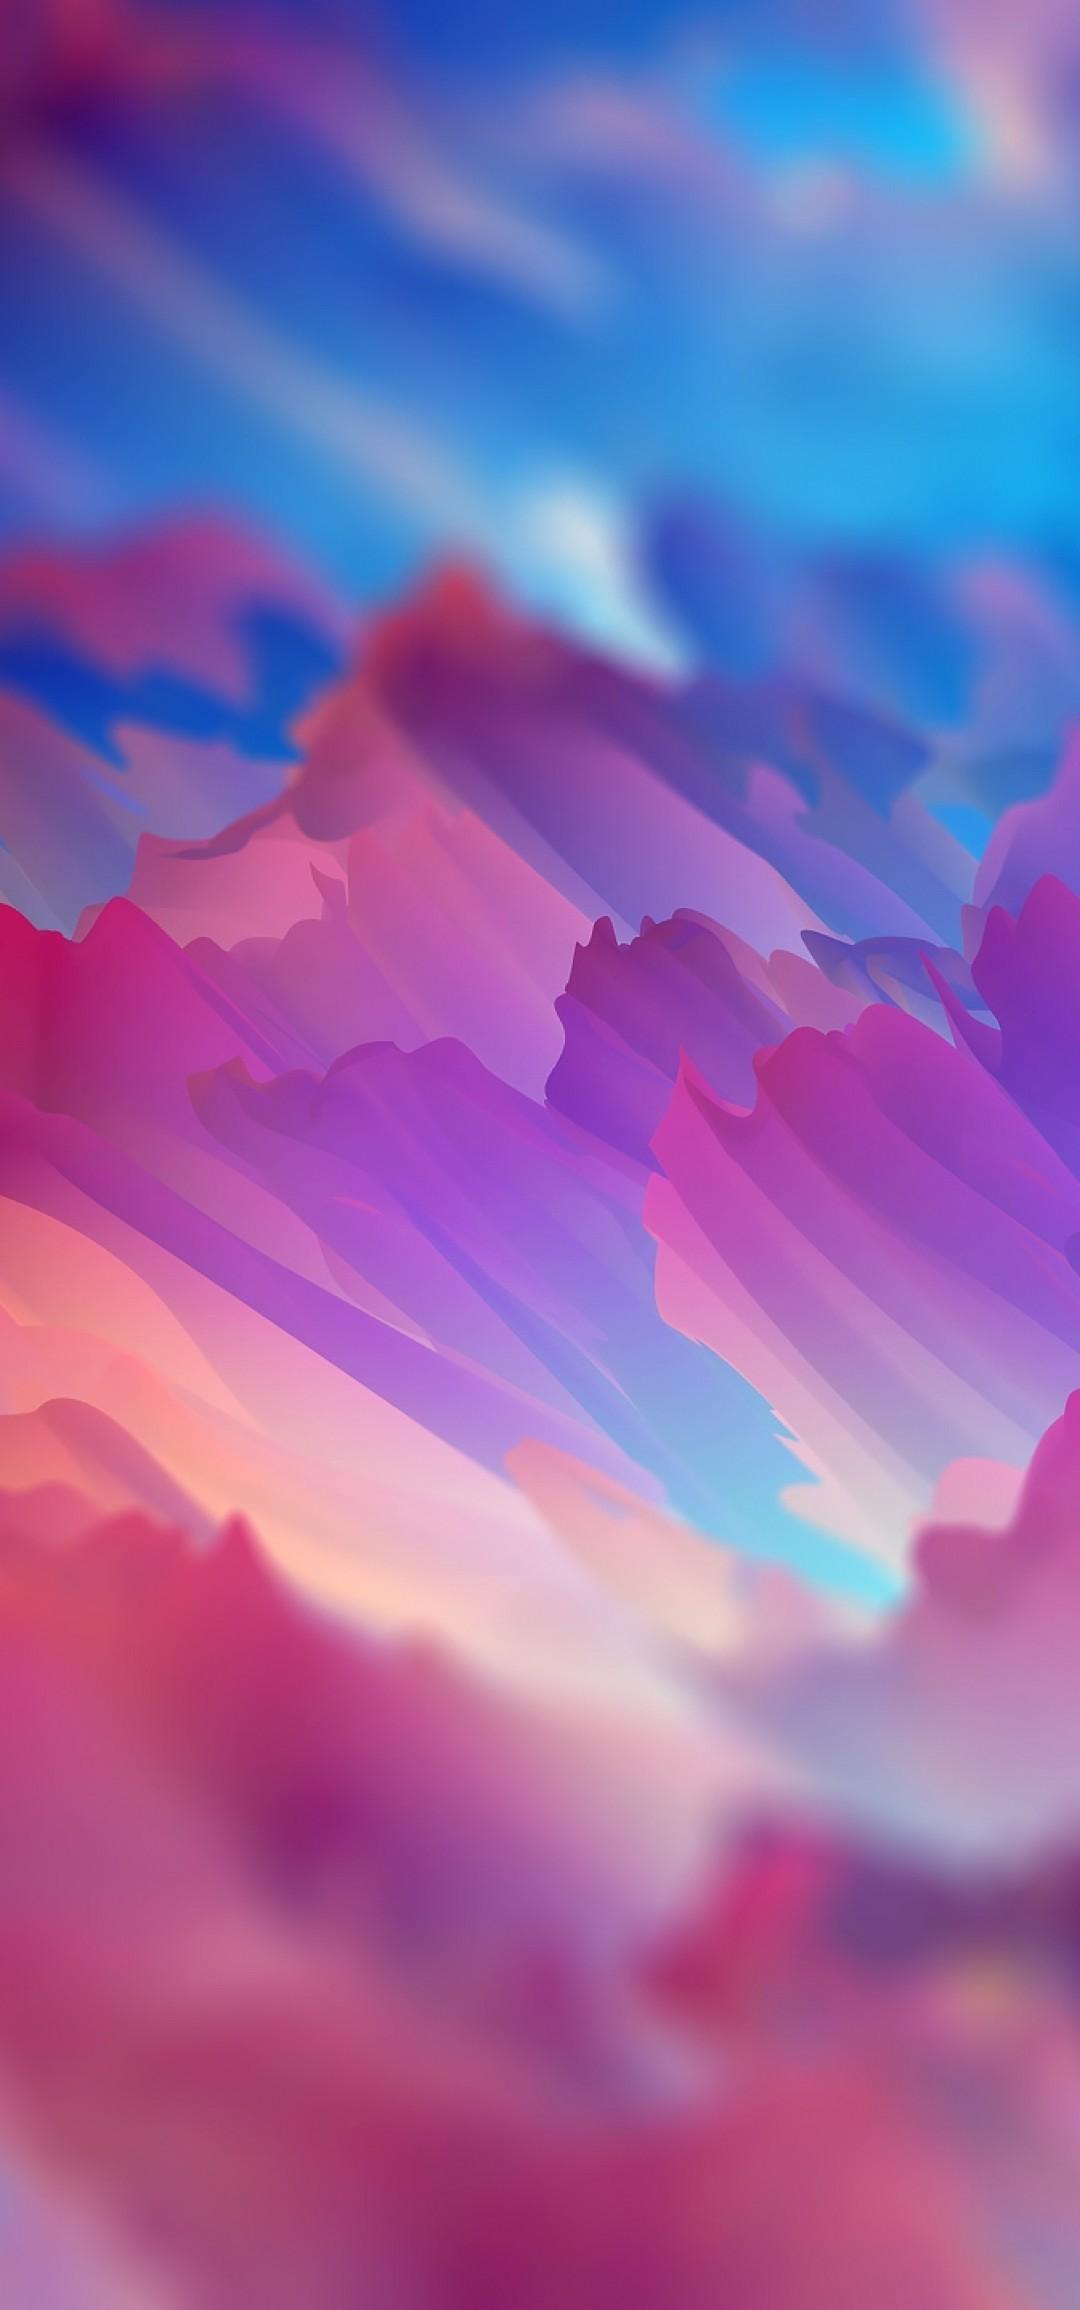 Download 1080x2310 Colorful Clouds, Blurry, Painting Wallpaper